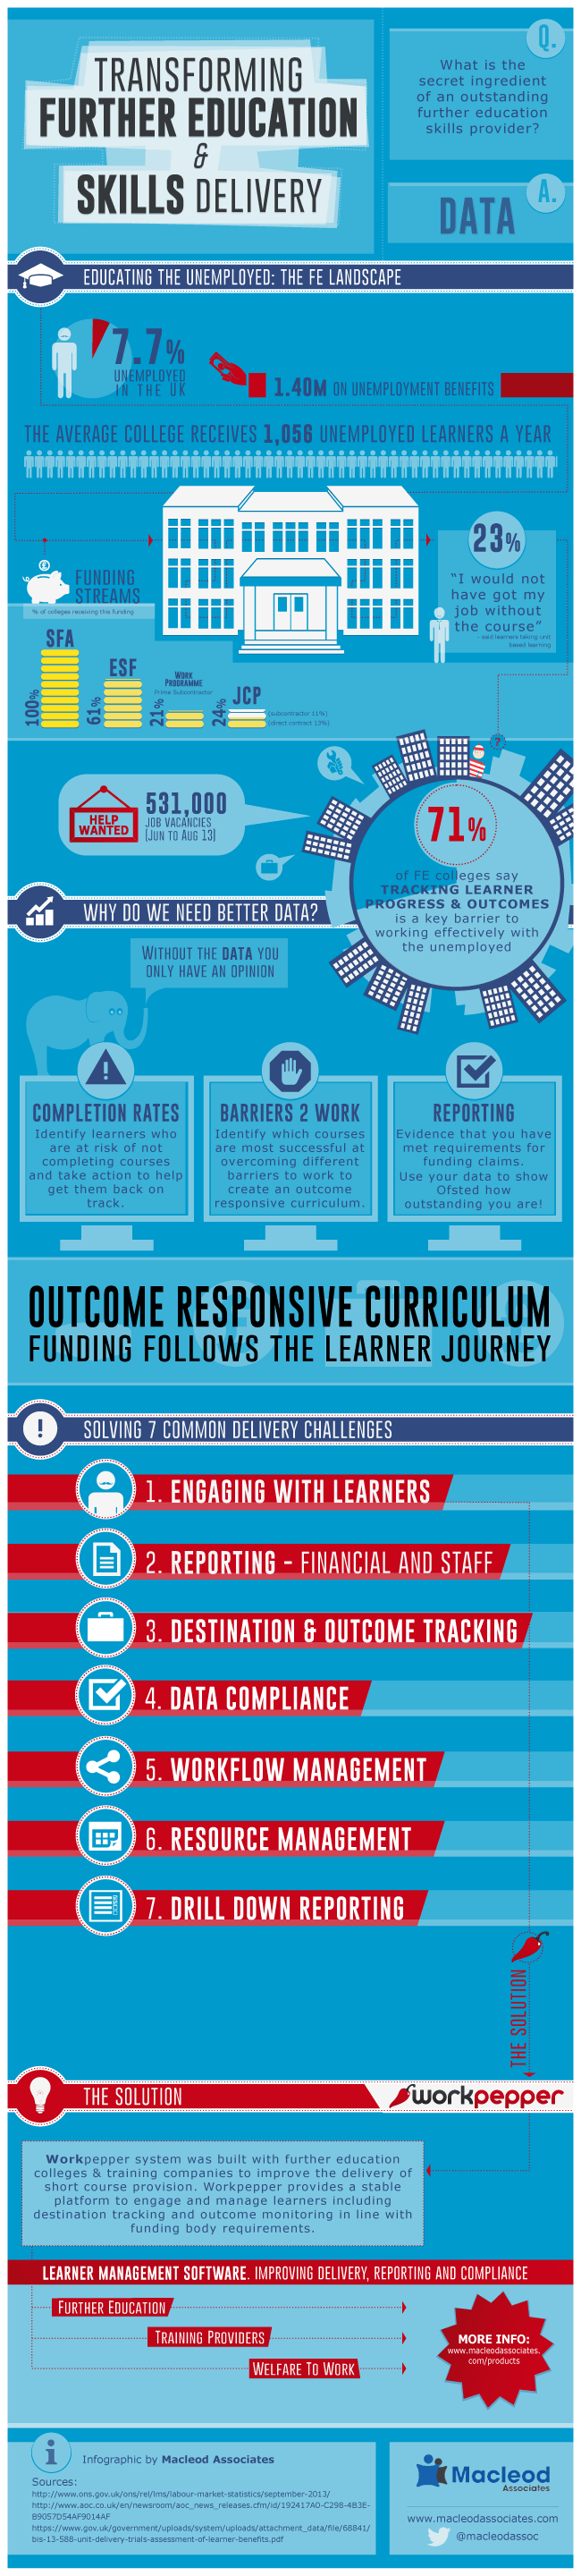 Transforming Further Education and Skills Delivery infographic